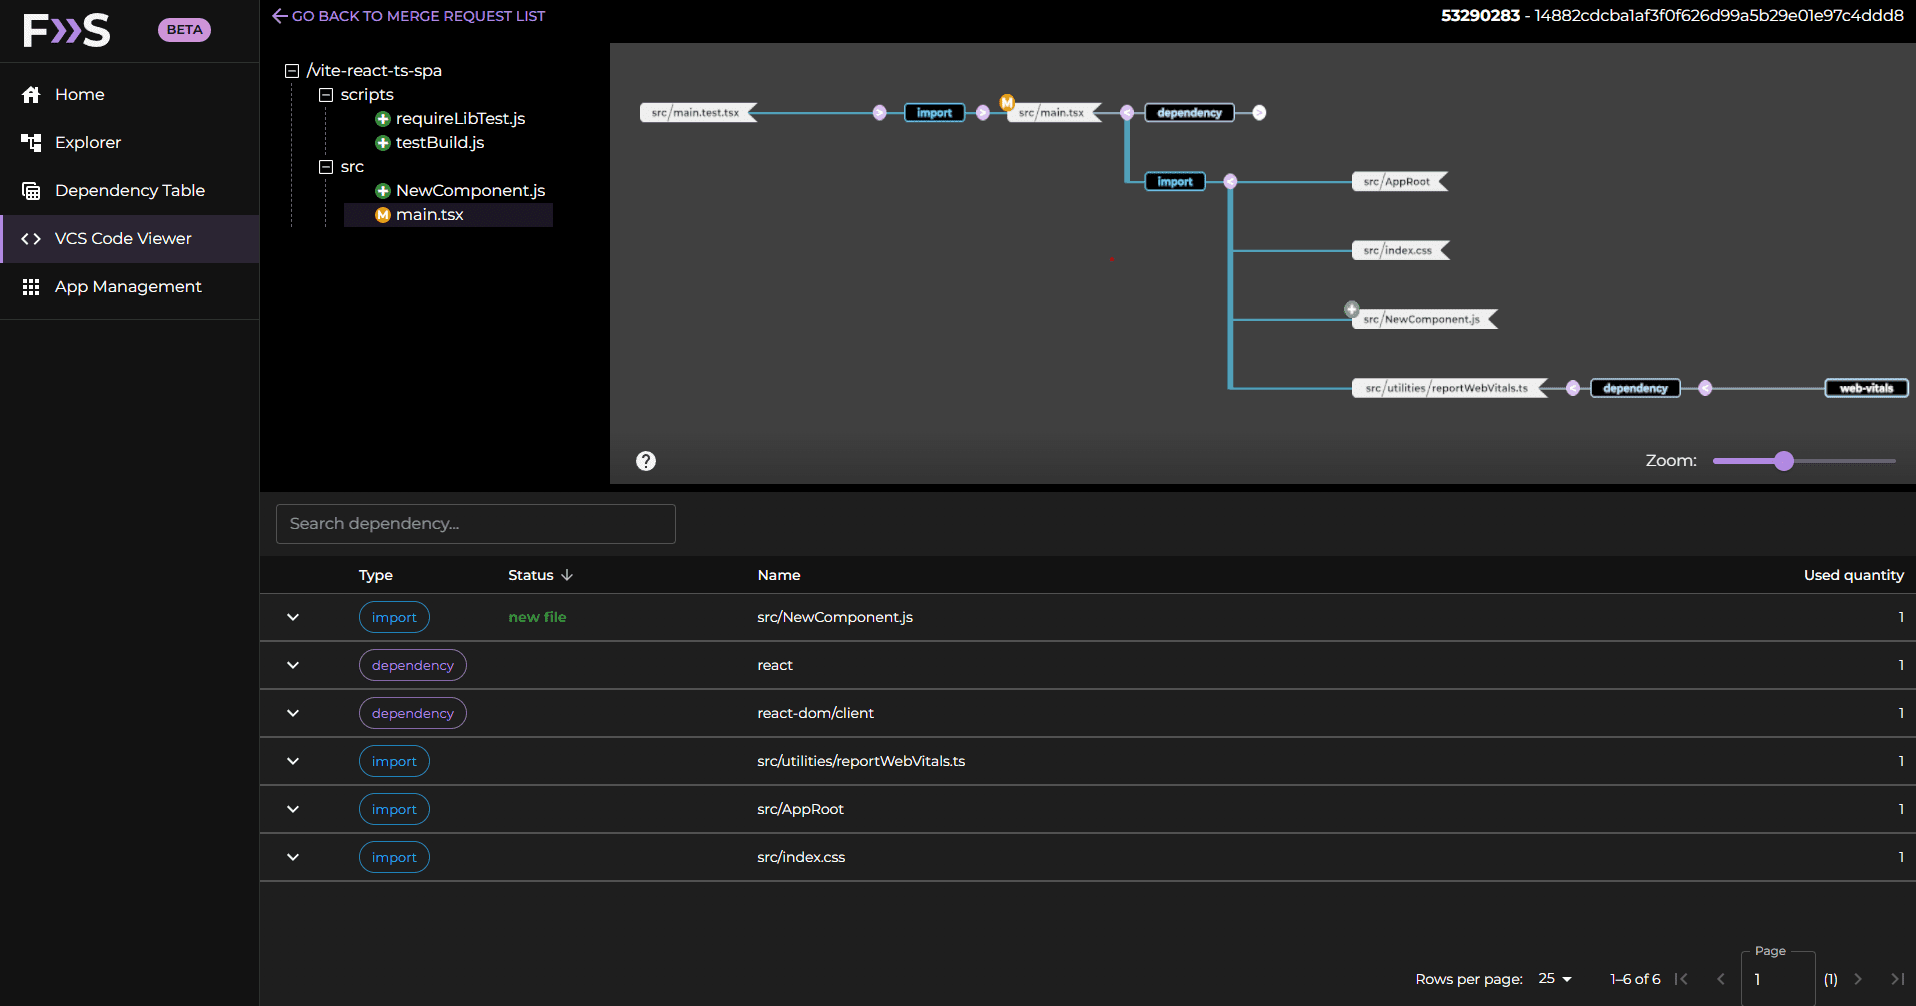 shows how our integration with GitLab or GitHub constructs the code changes in the merge request or pull request into a visual tree graph so you can understand how files interact with each other and their dependencies